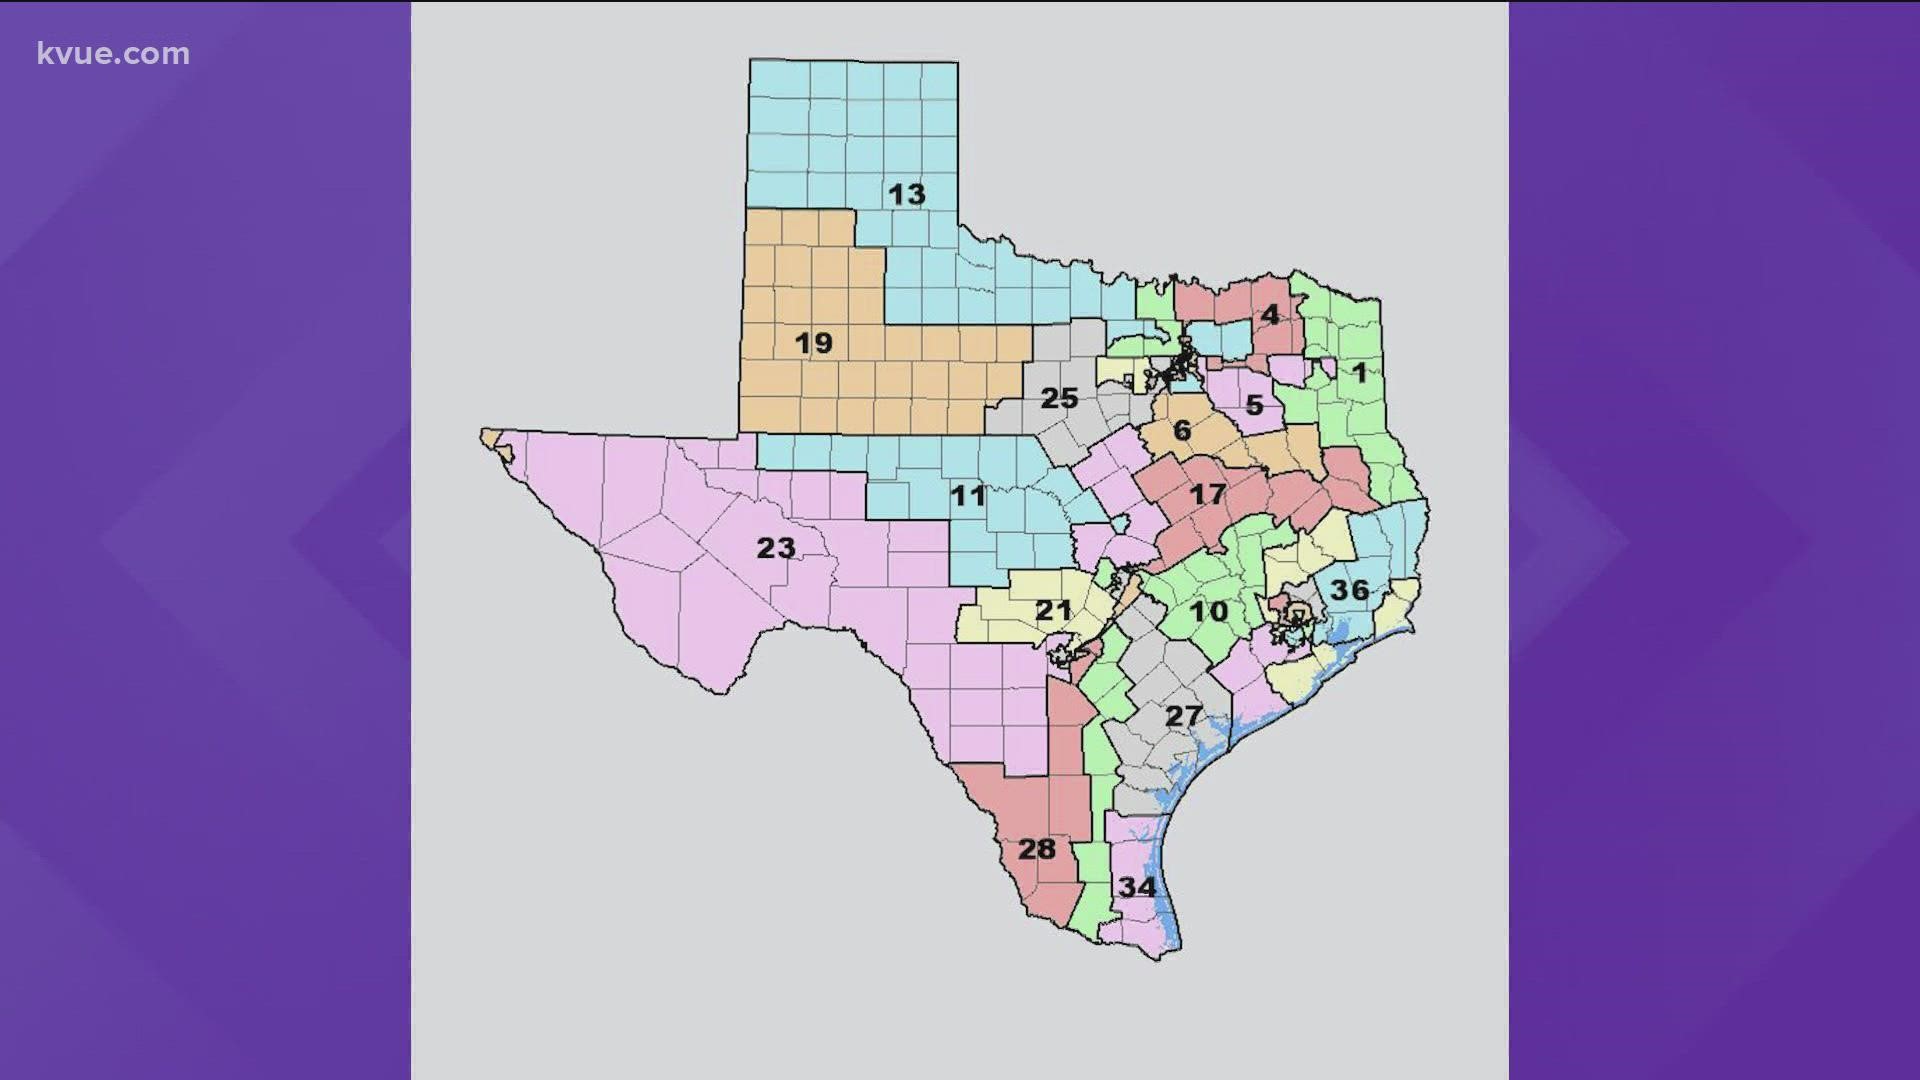 On Monday, a Latino legal rights organization filed a lawsuit challenging all the new redistricting maps.